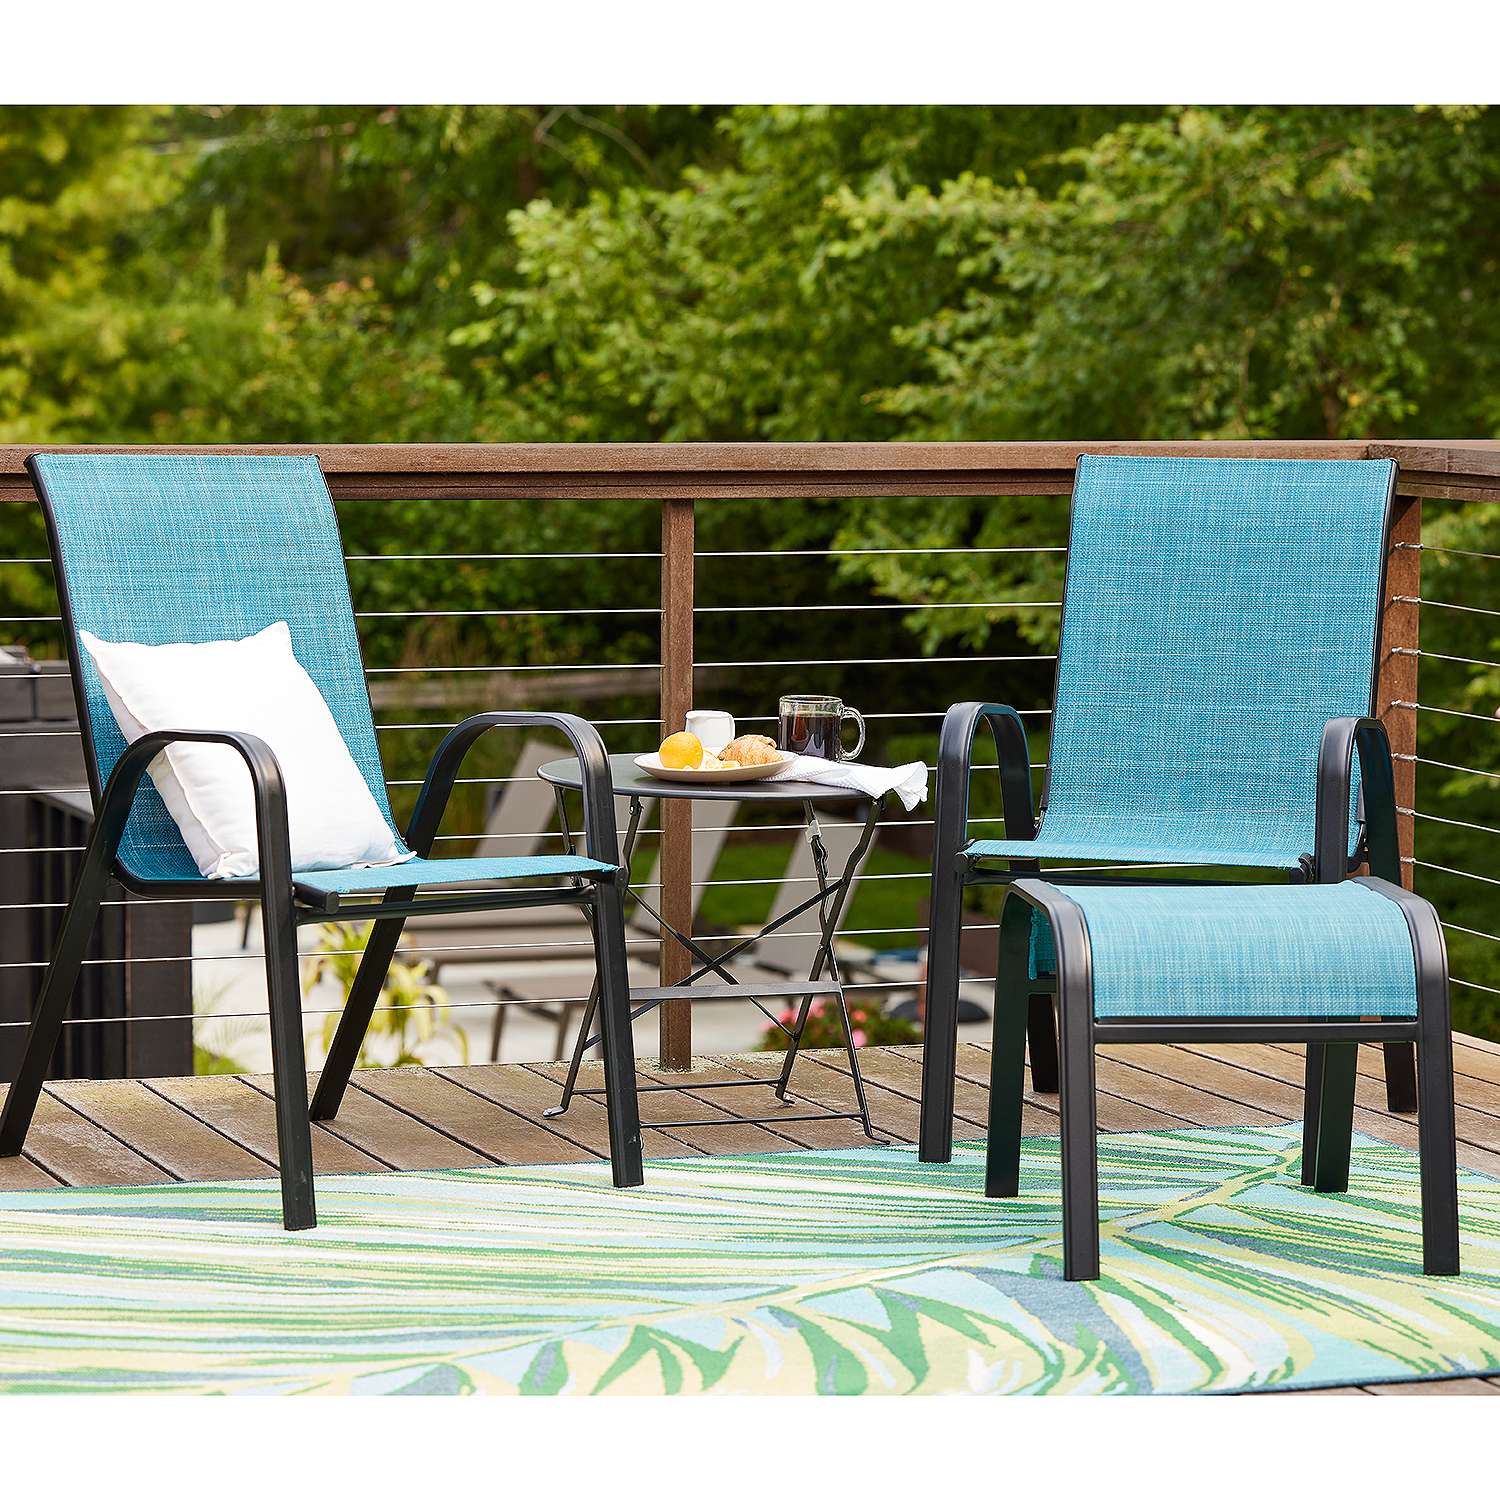 Sonoma Goods For Life Coronado Stacking Patio Chair (3 Colors) $13.16 + Free Store Pickup at Kohl's or F/S on Orders $49+